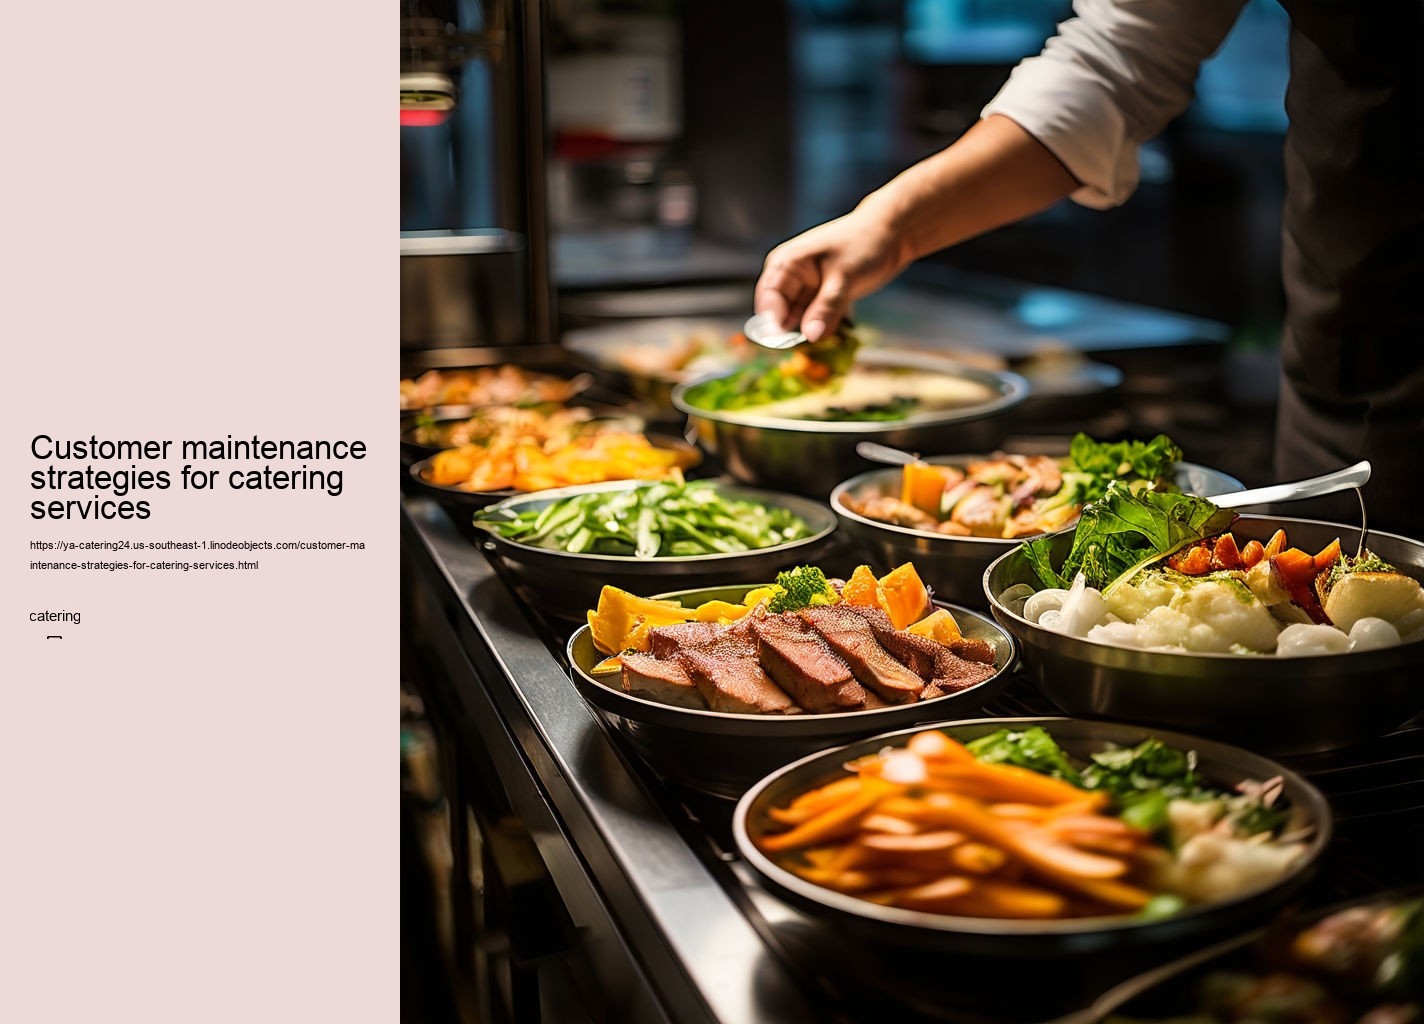 Customer maintenance strategies for catering services